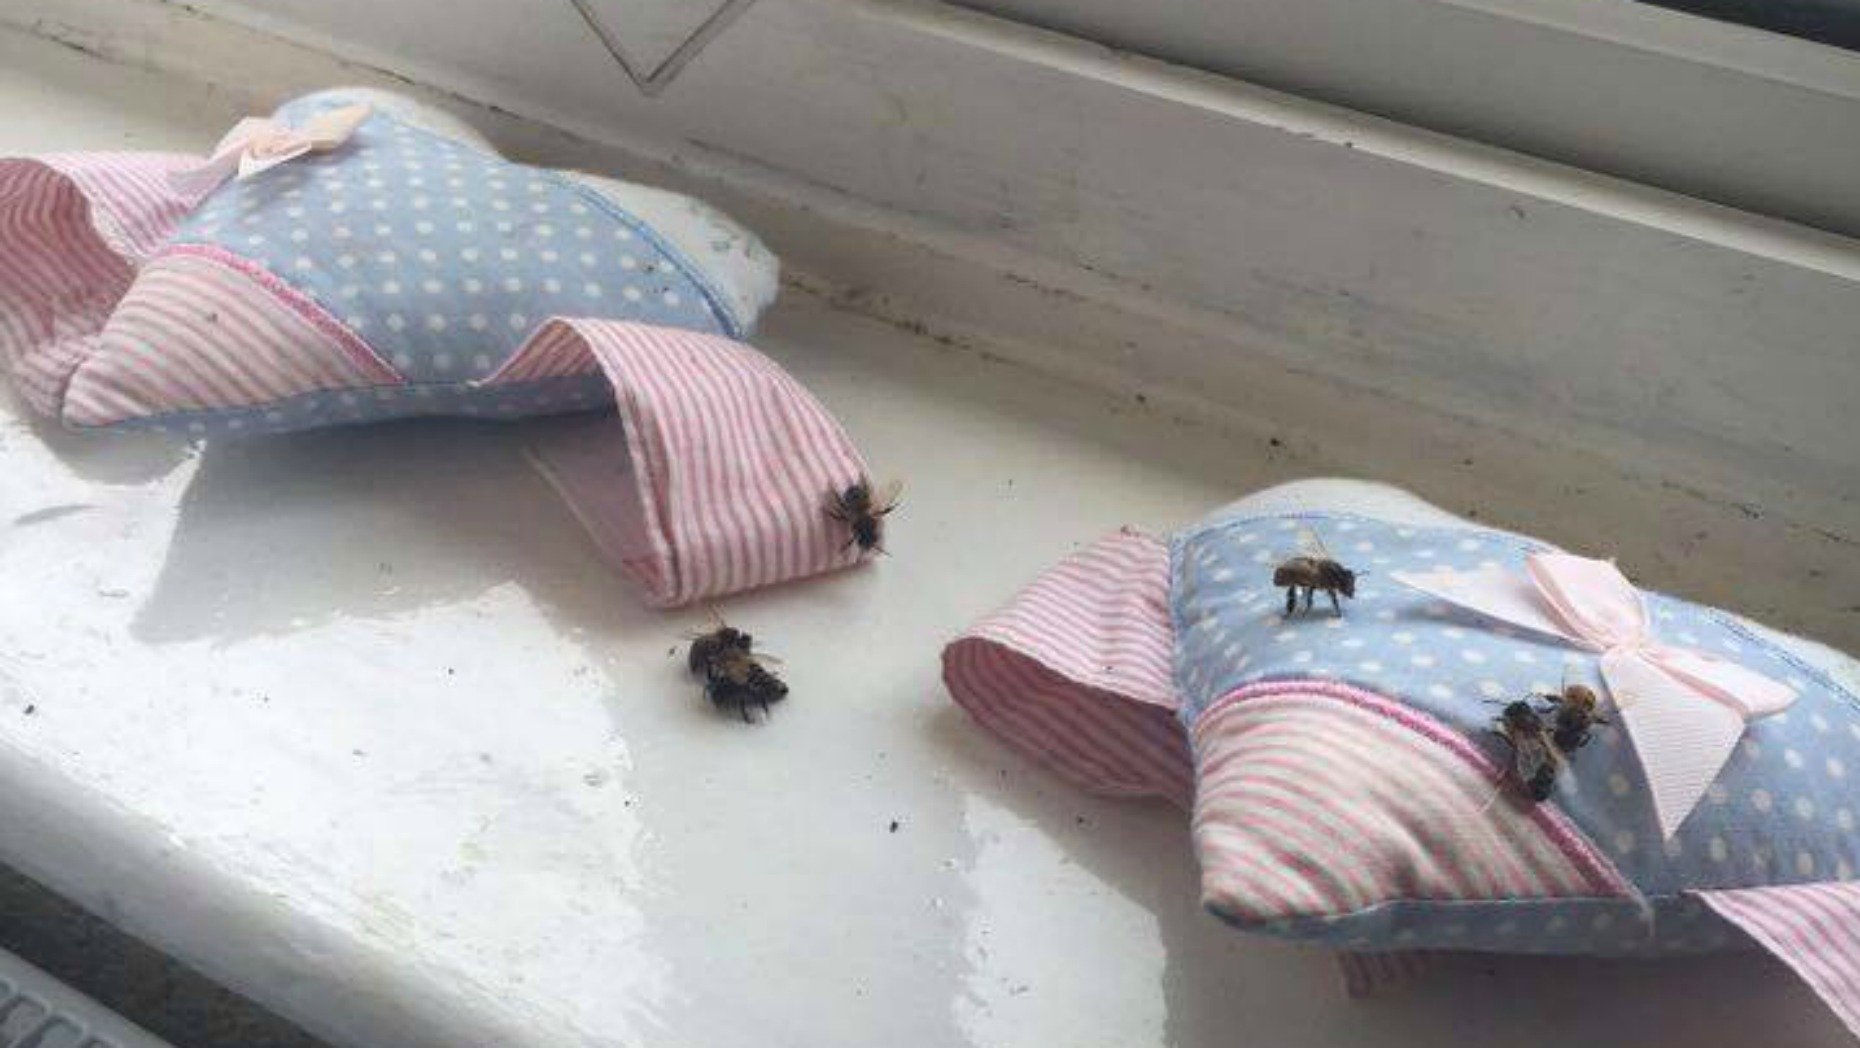 The bees went into the Toni's three year old daughter's bedroom